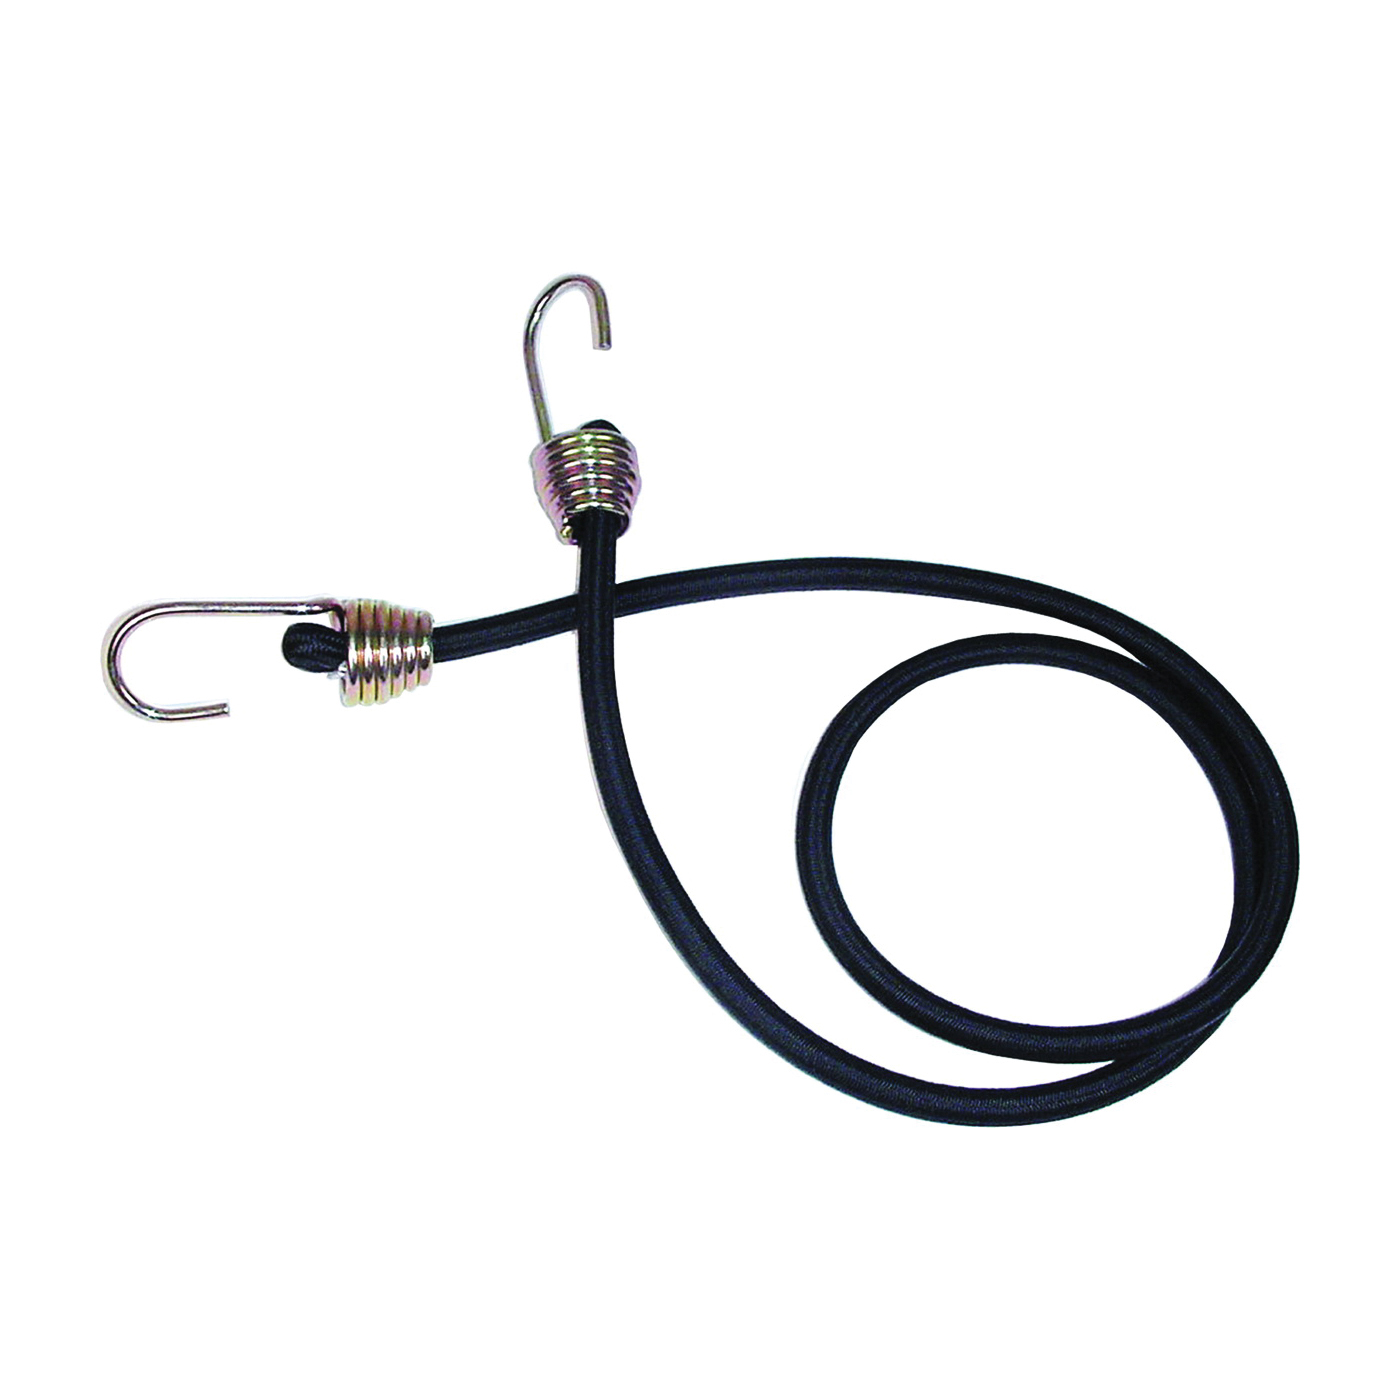 06185 Bungee Cord, 13/32 in Dia, 40 in L, Rubber, Black, Hook End